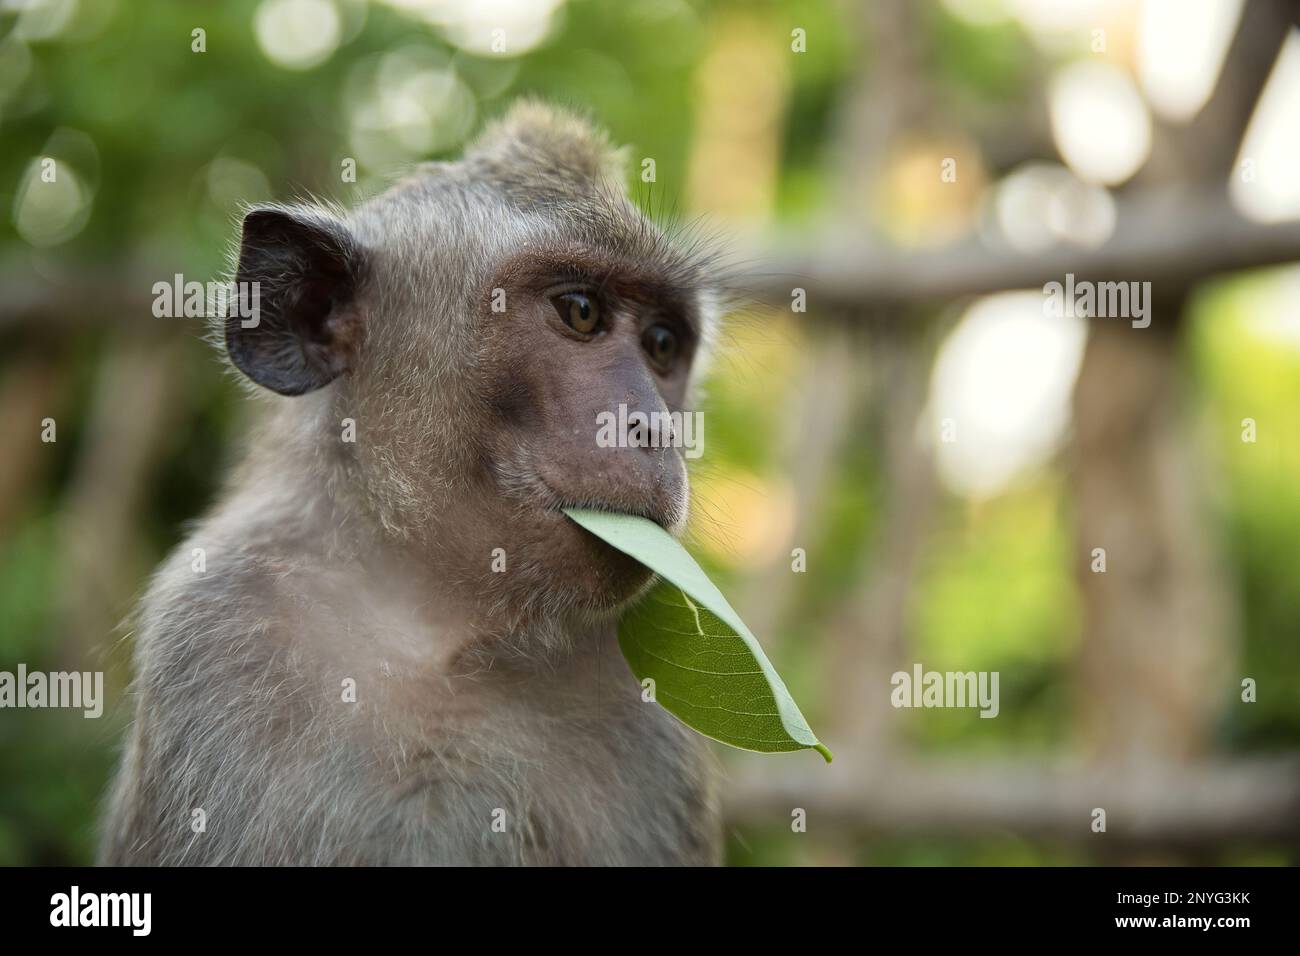 Portrait close-up of a young cynomolgus monkey holding a green leaf in its mouth, in the background diffuse light shining leaves and a wooden fence. Stock Photo